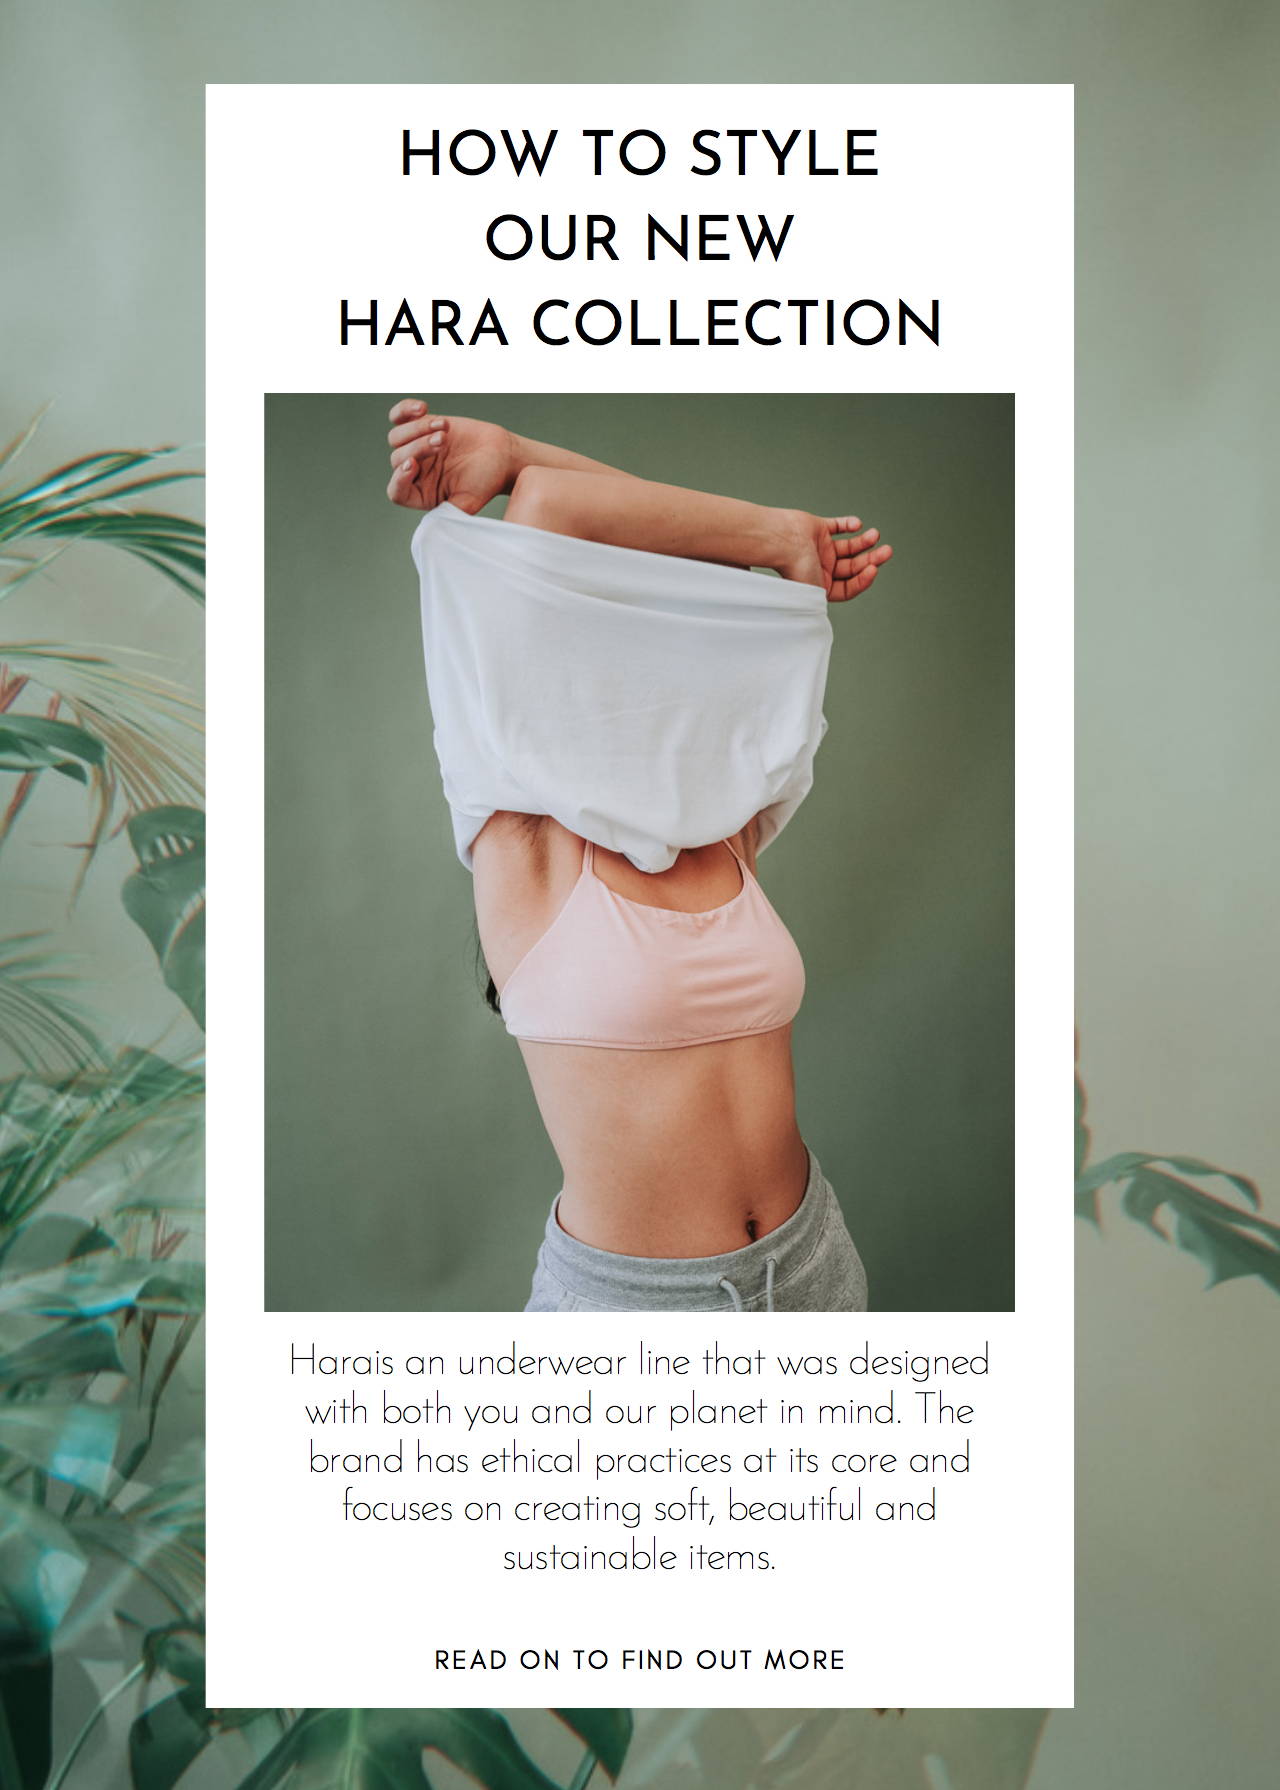 How to Style Our New Hara Collection